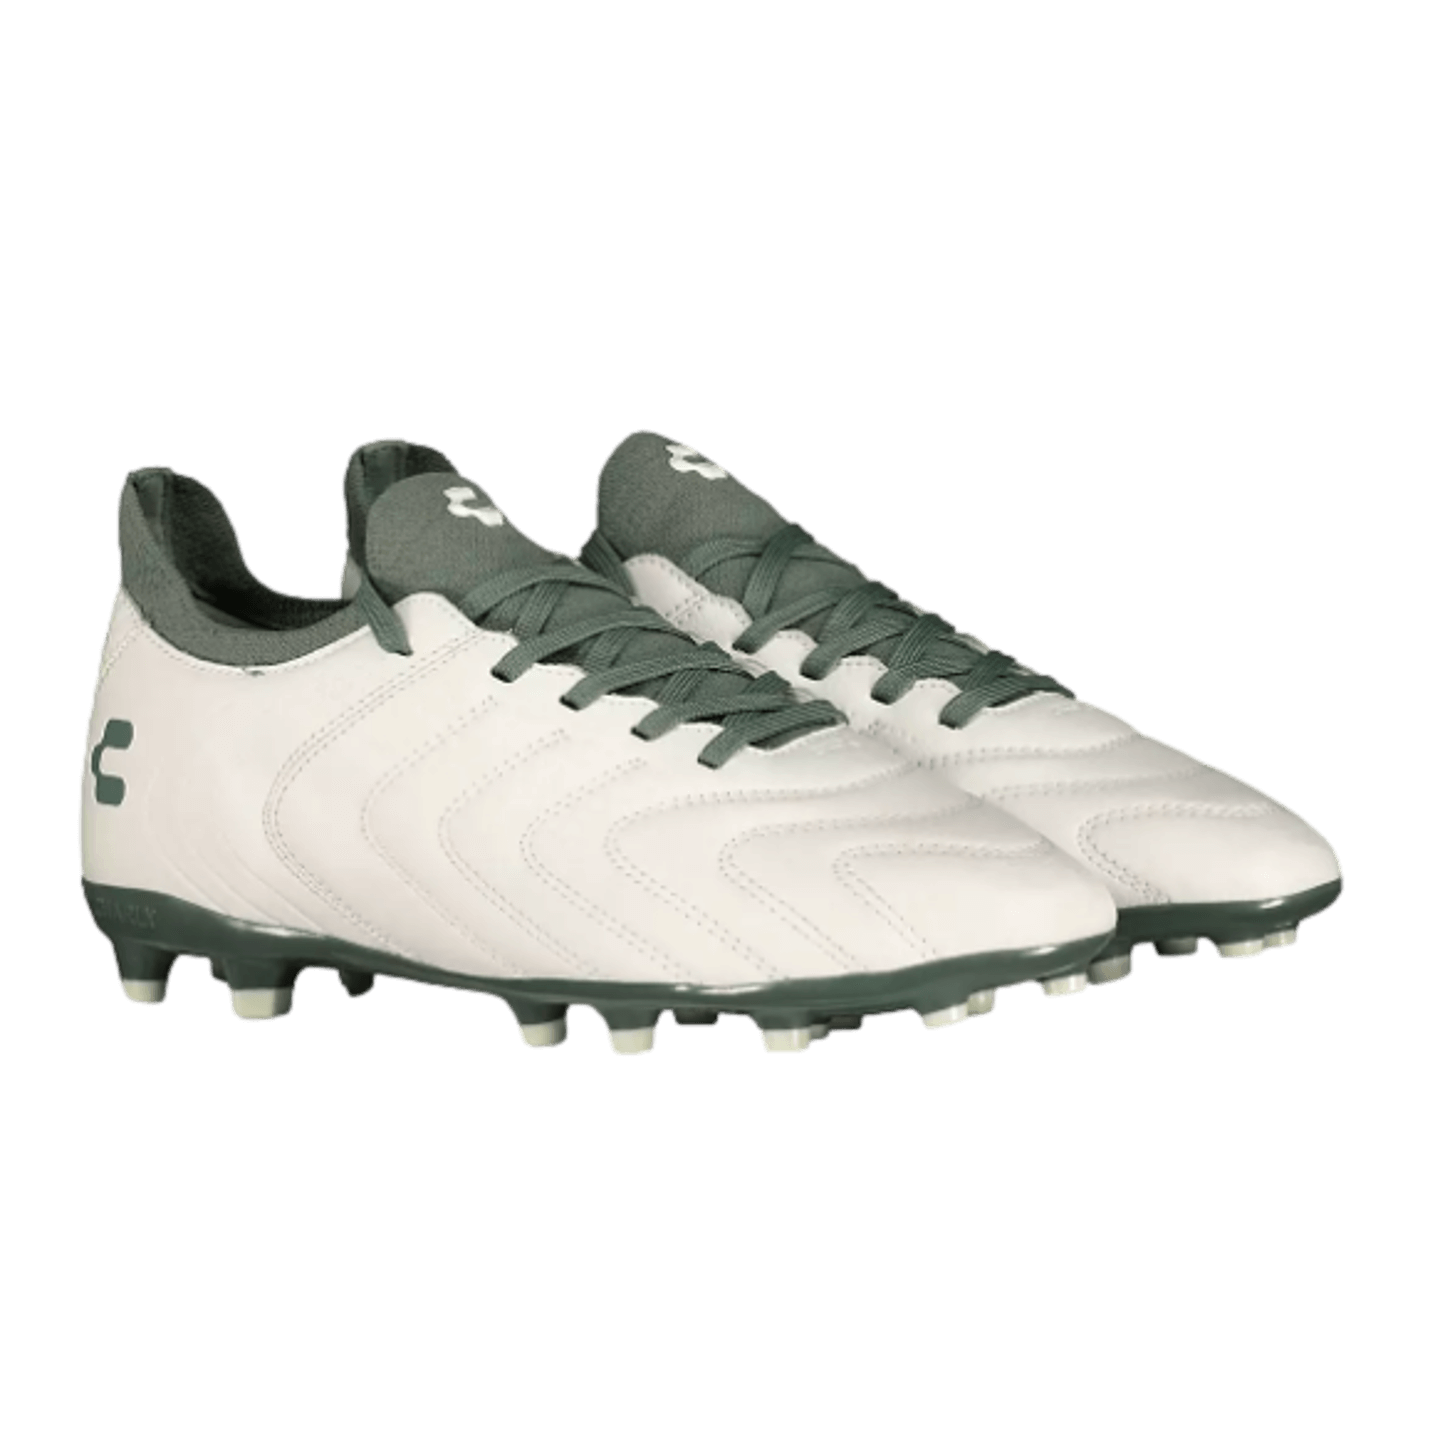 Charly Encore RL Firm Ground Cleats